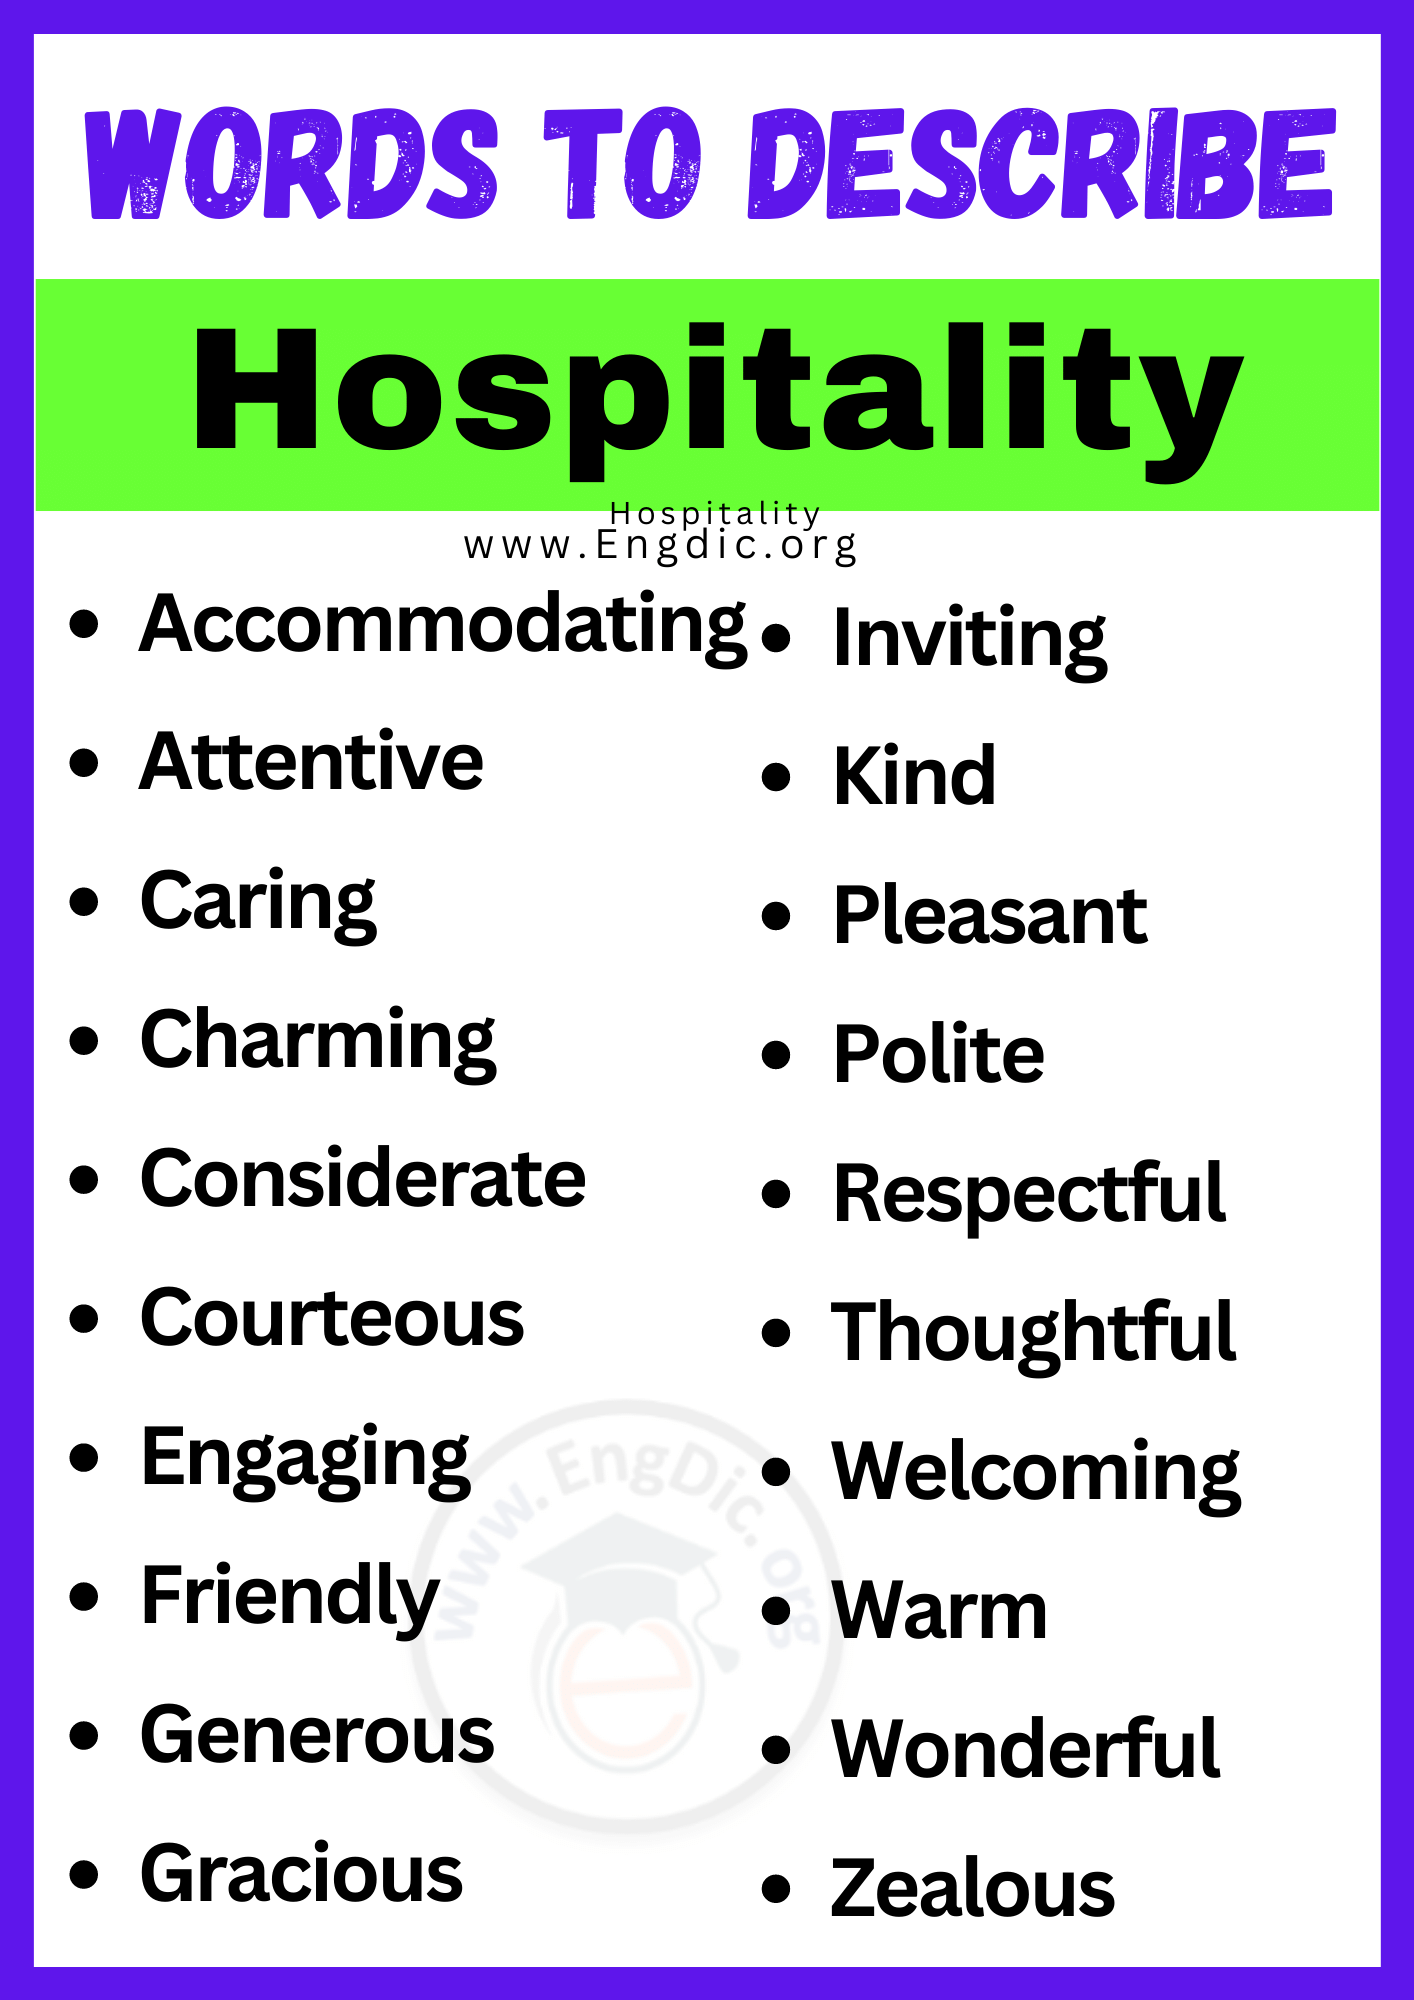 Words to Describe Hospitality